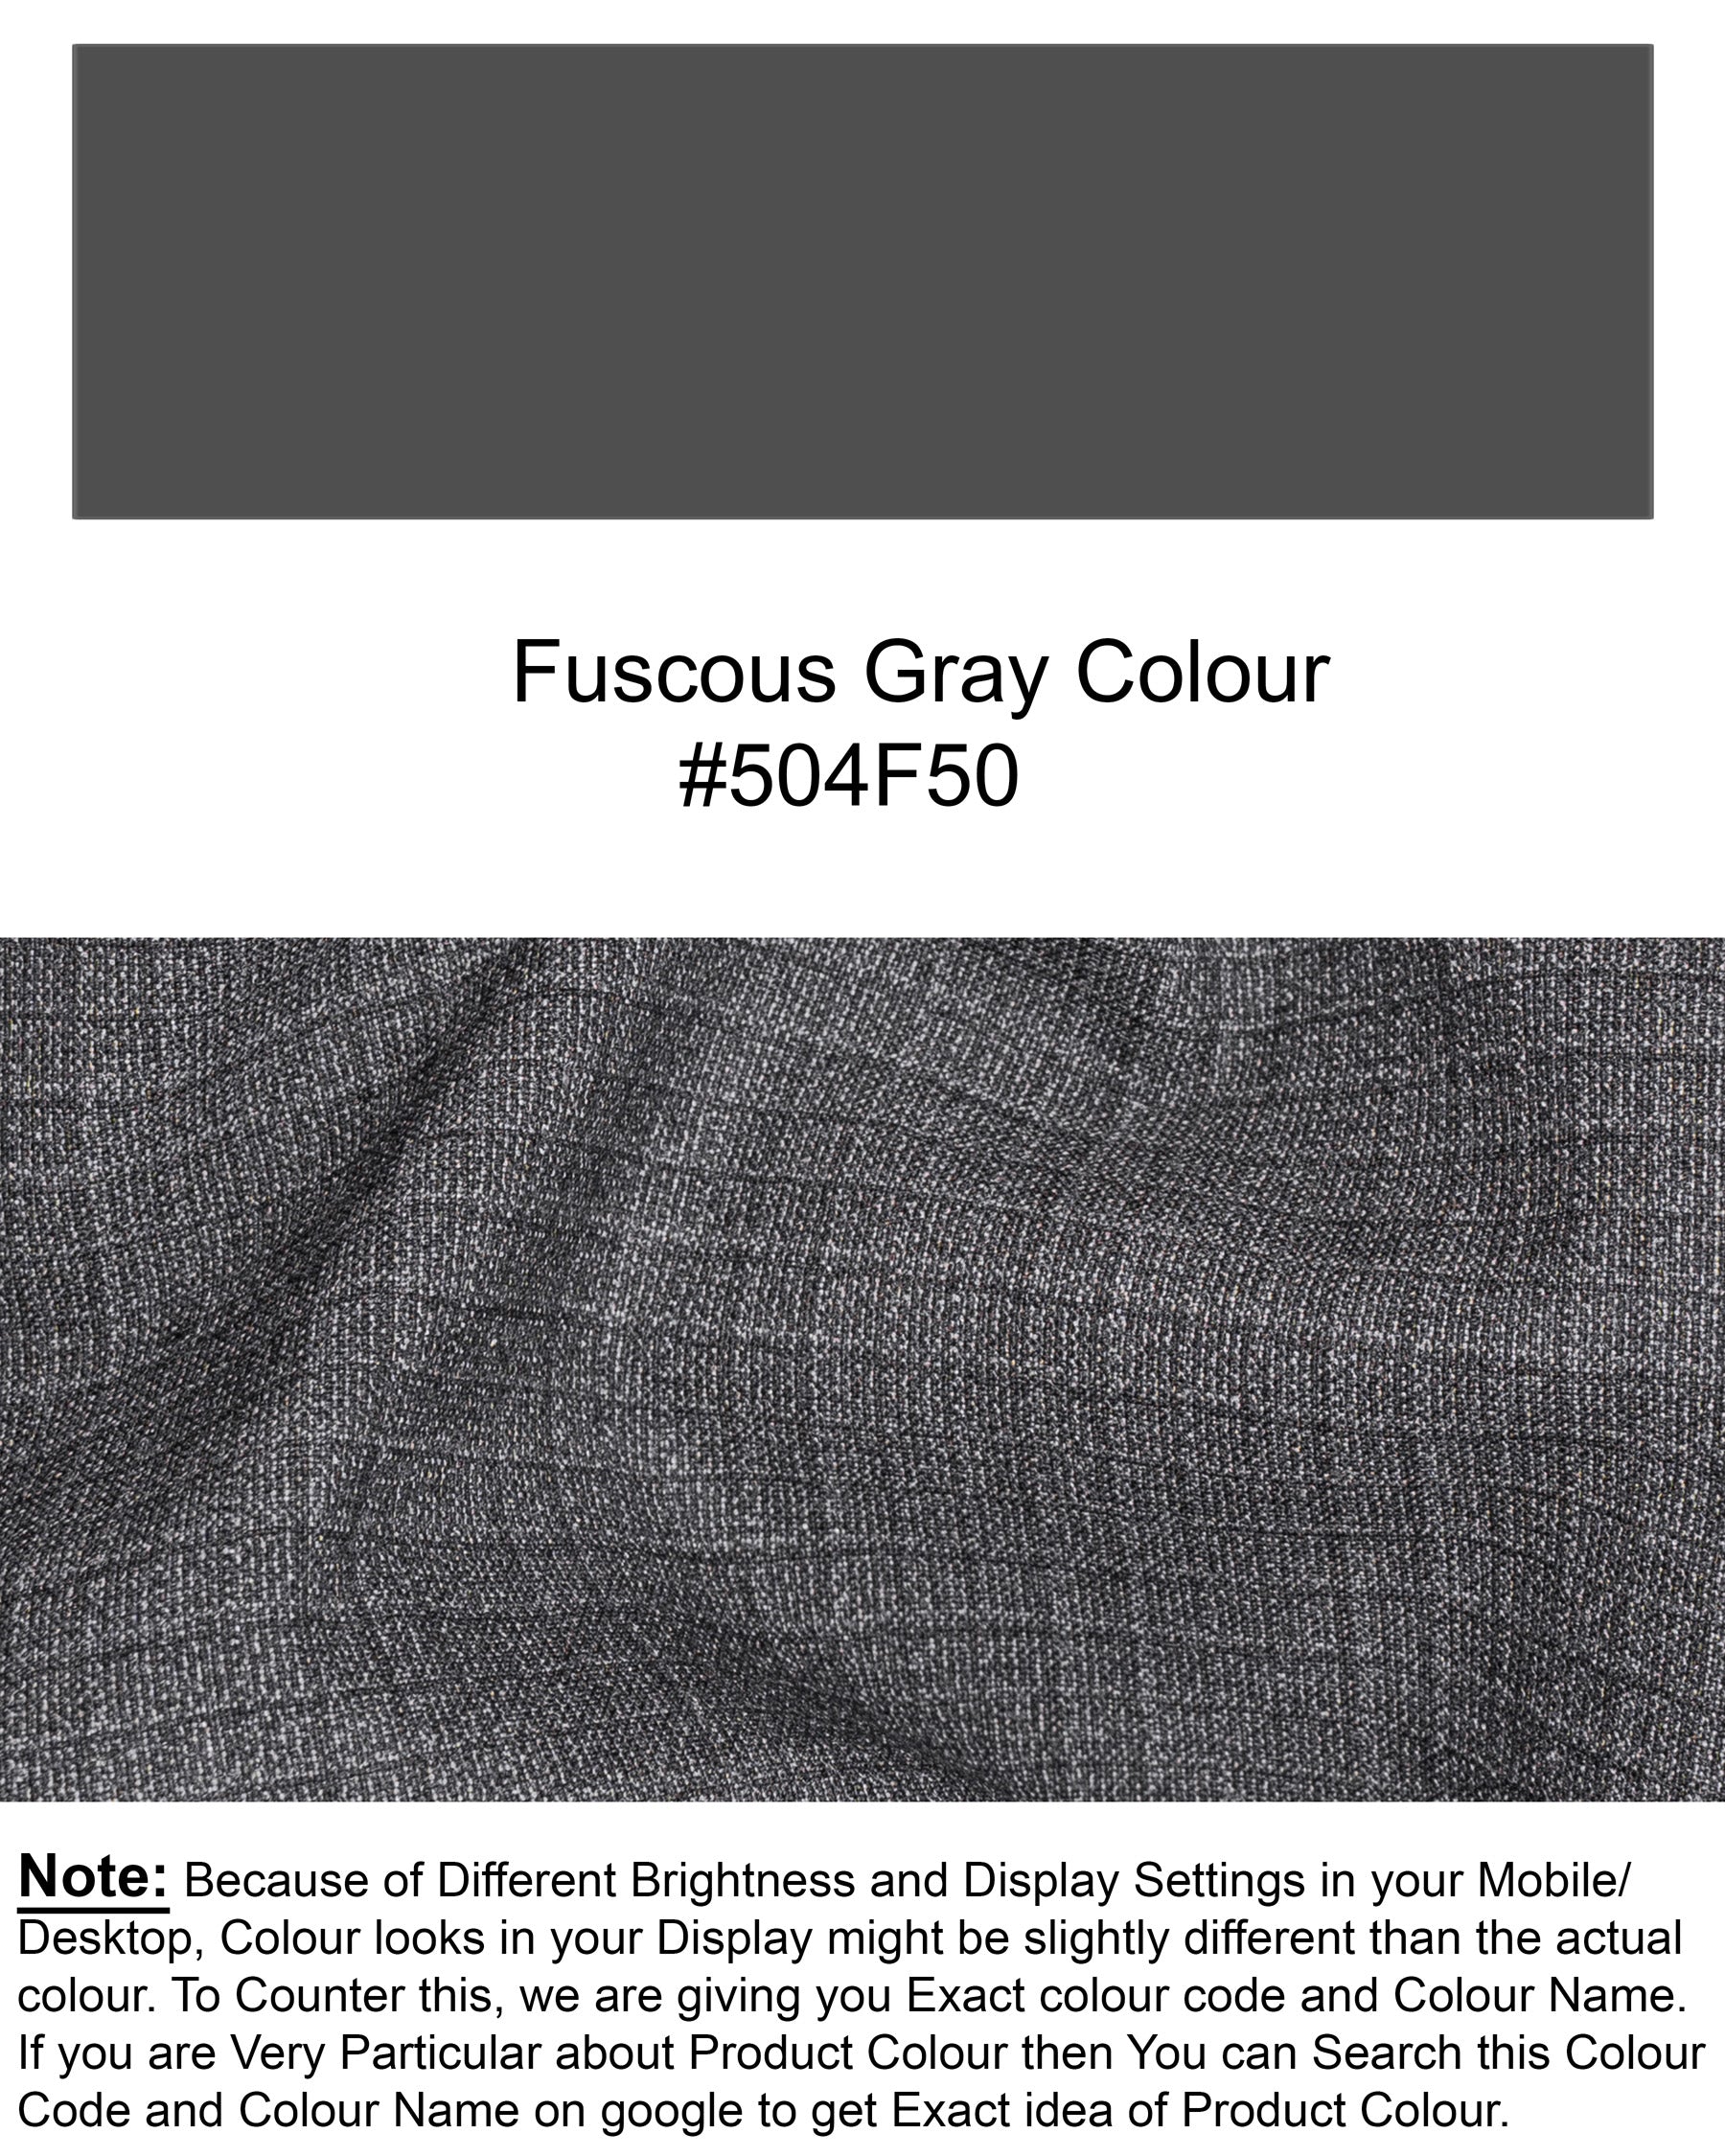 Fuscous Gray Chequered Wool Rich Pant T1448-28, T1448-30, T1448-32, T1448-34, T1448-36, T1448-38, T1448-40, T1448-42, T1448-44